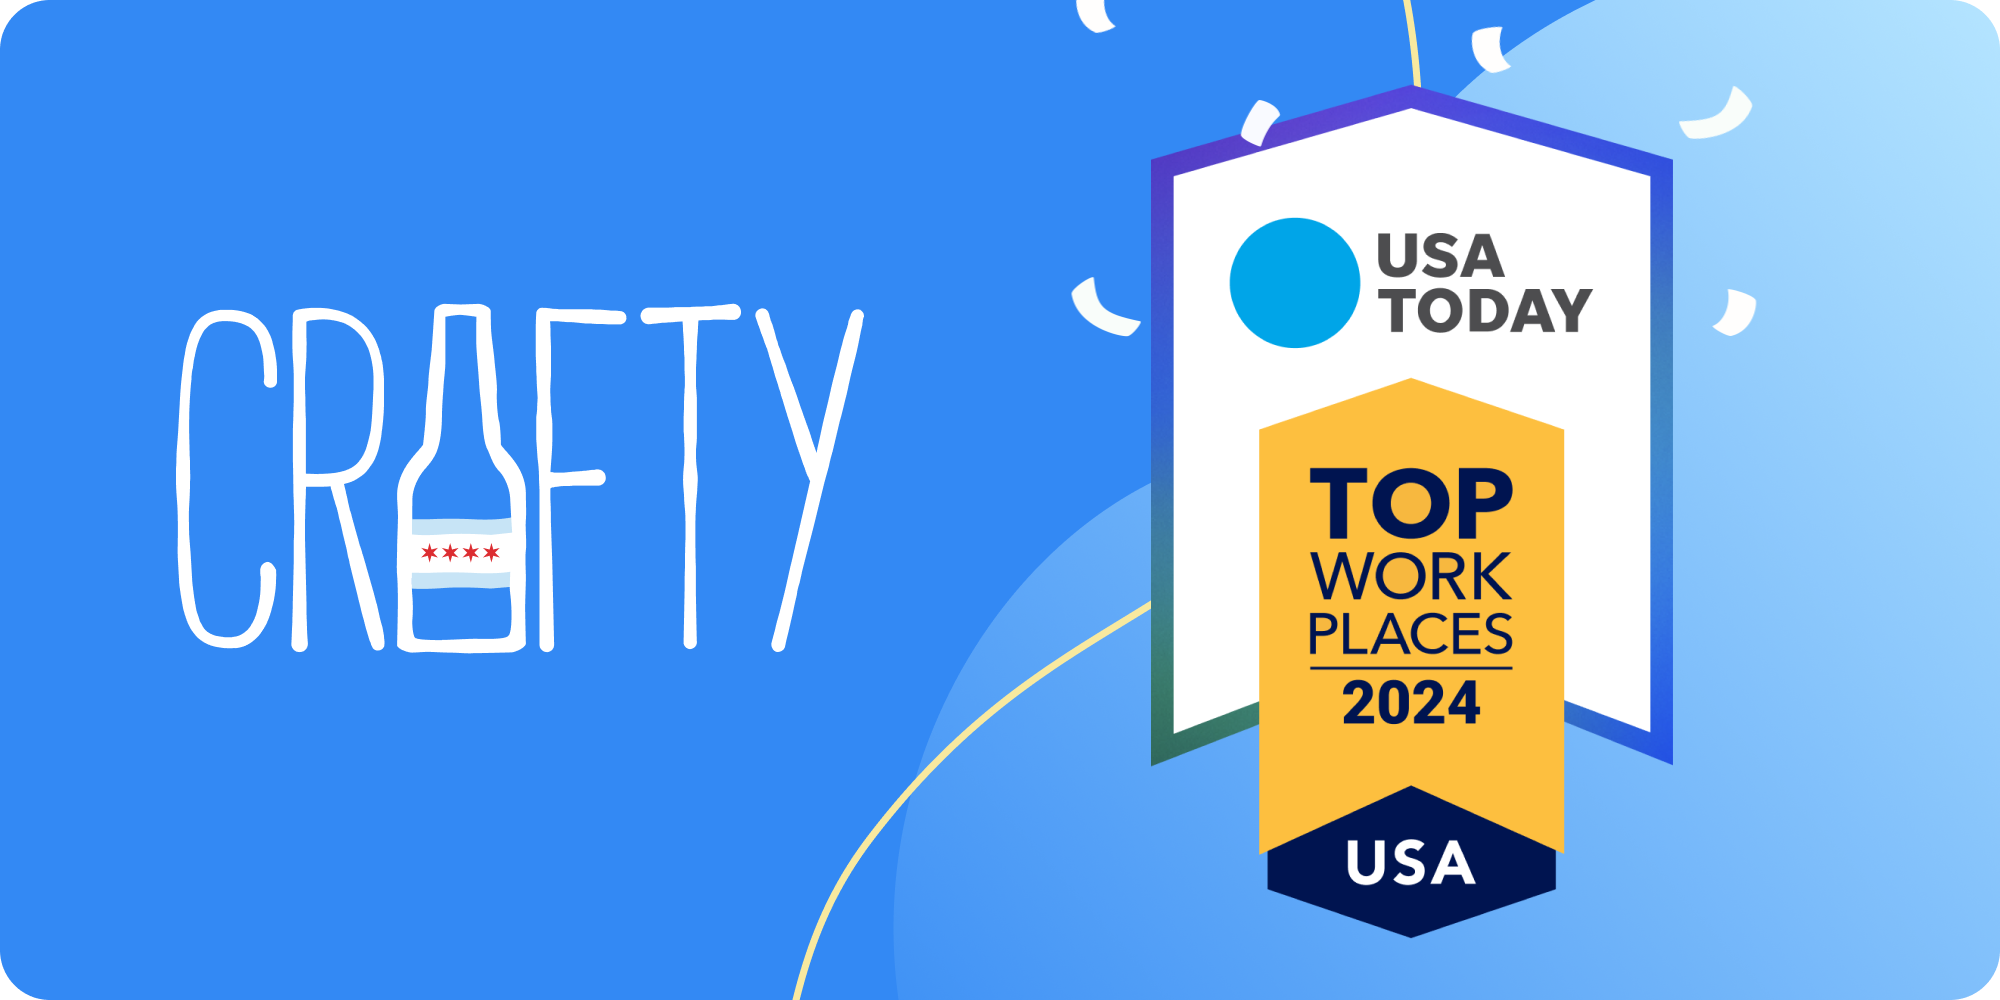 Crafty wins 2024 Top Workplace for USA Today